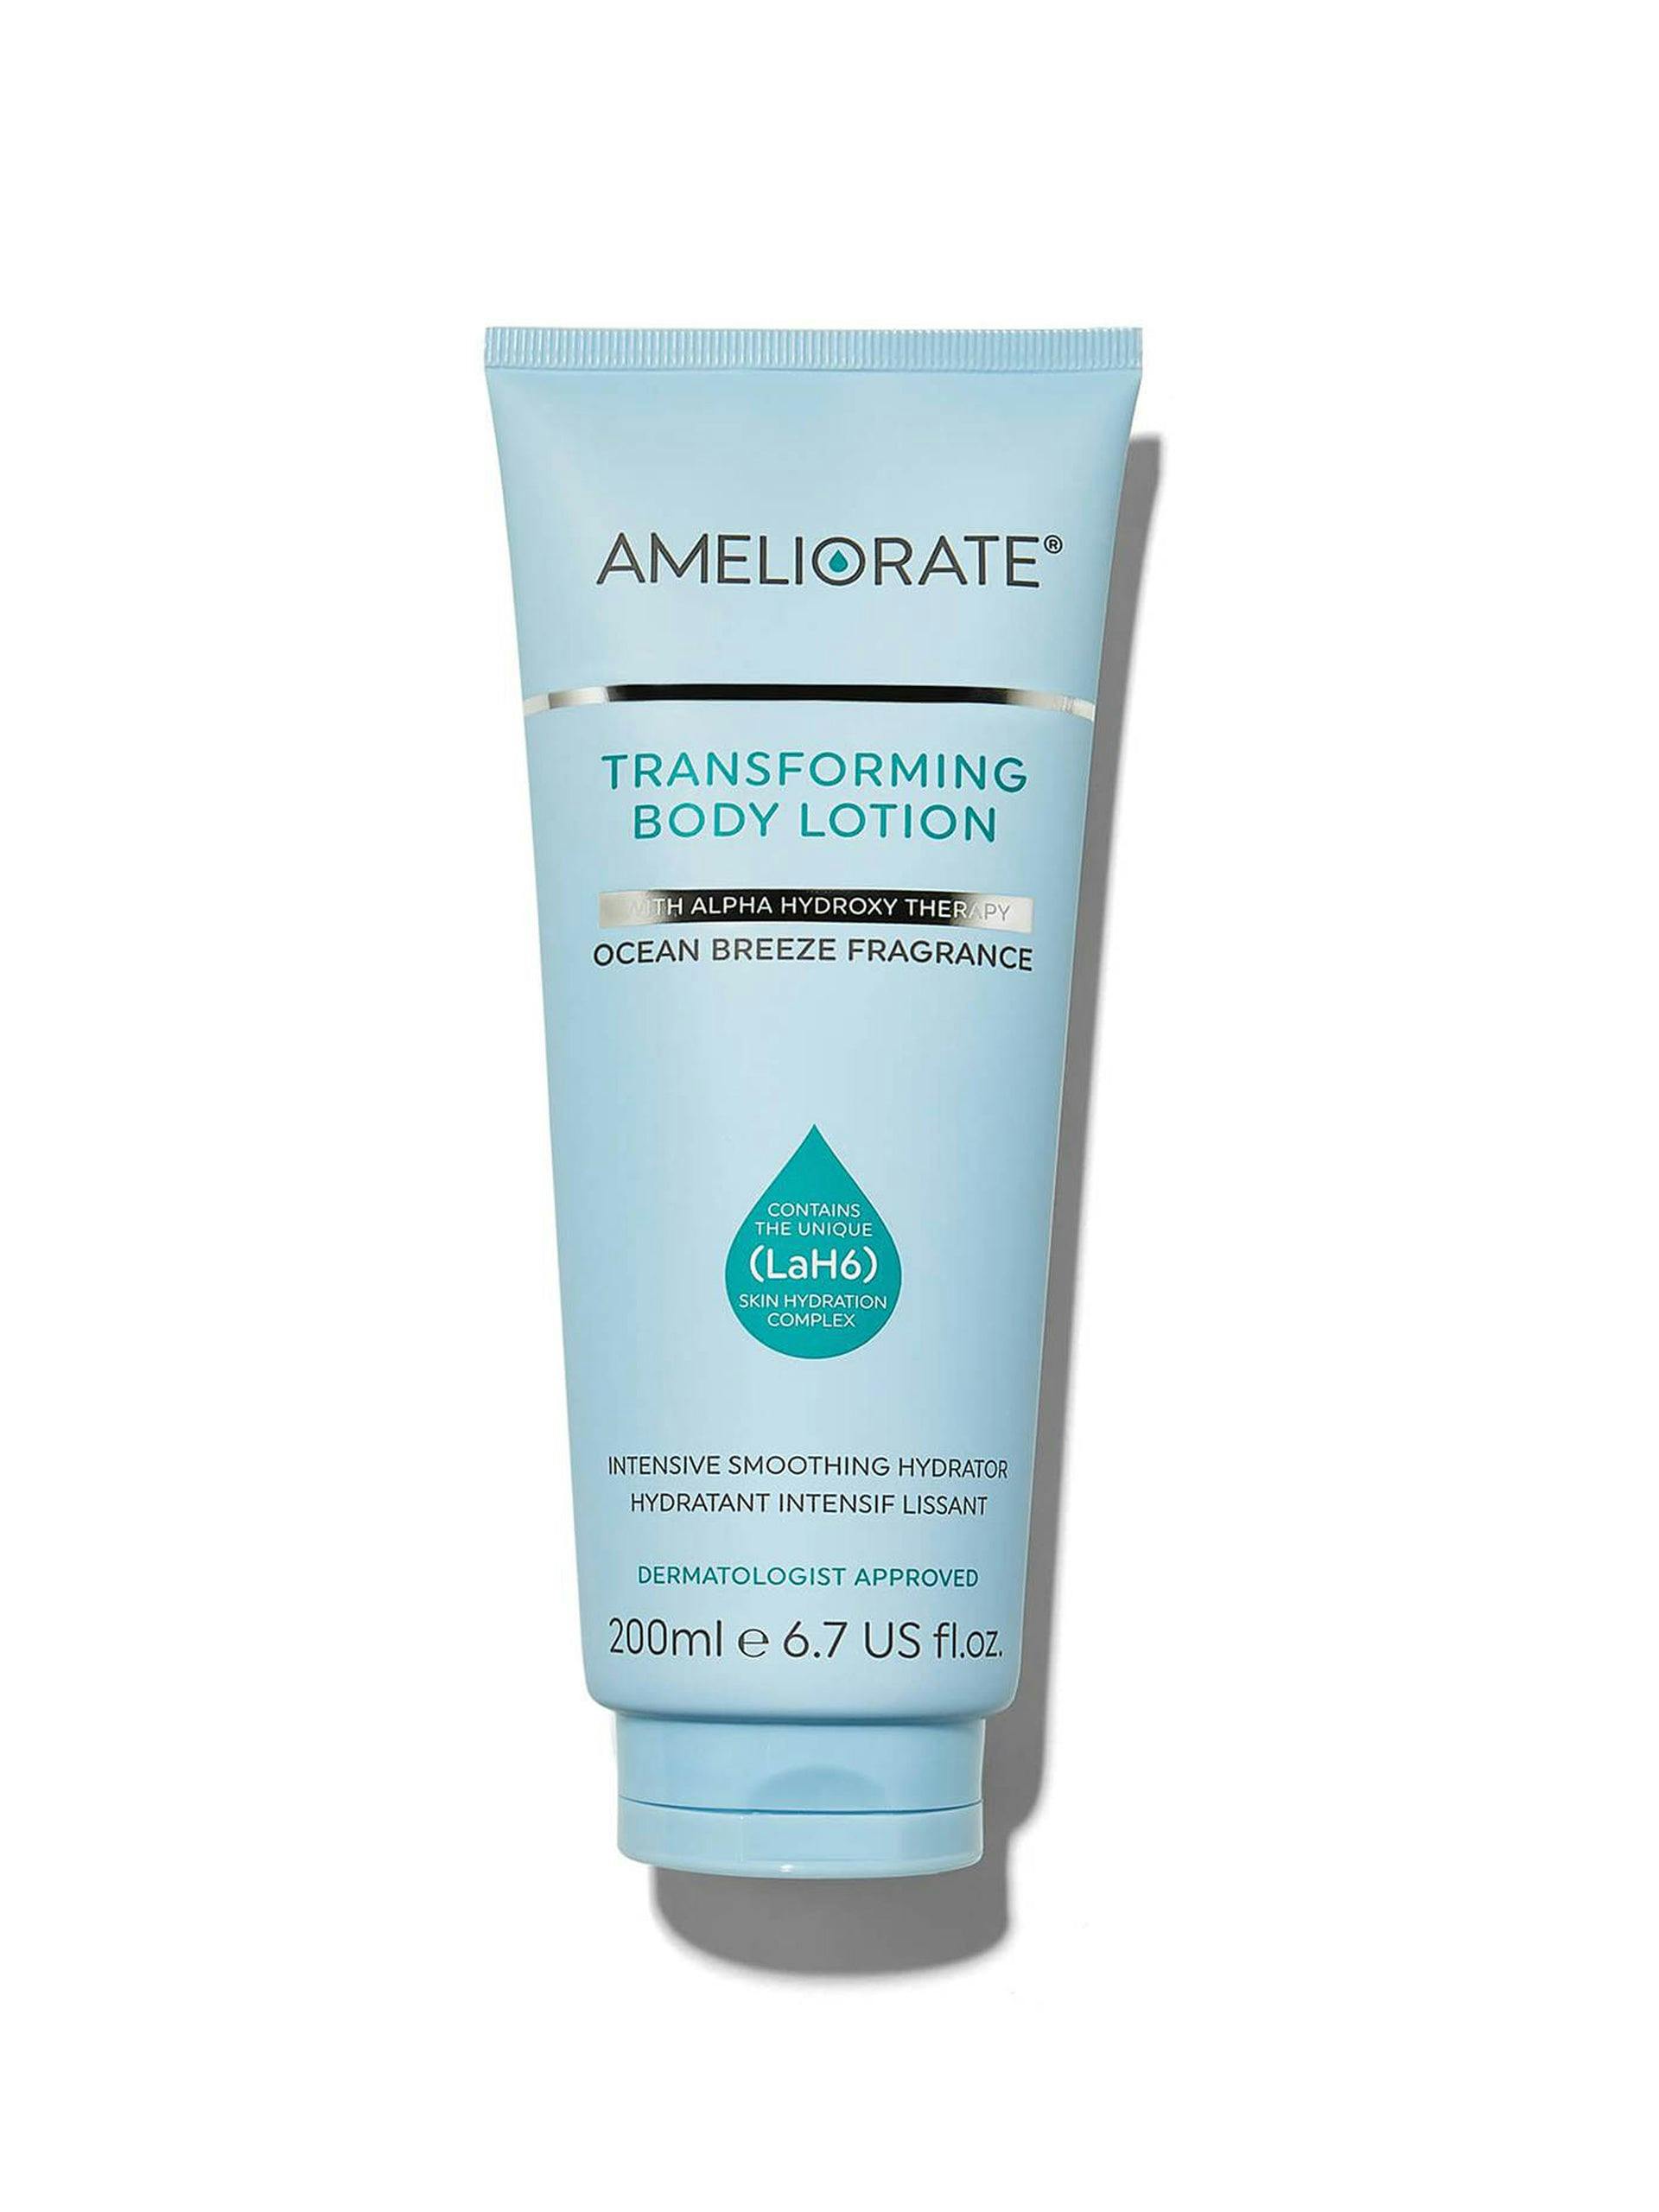 Transforming Body Lotion exfoliating and hydrating lotion